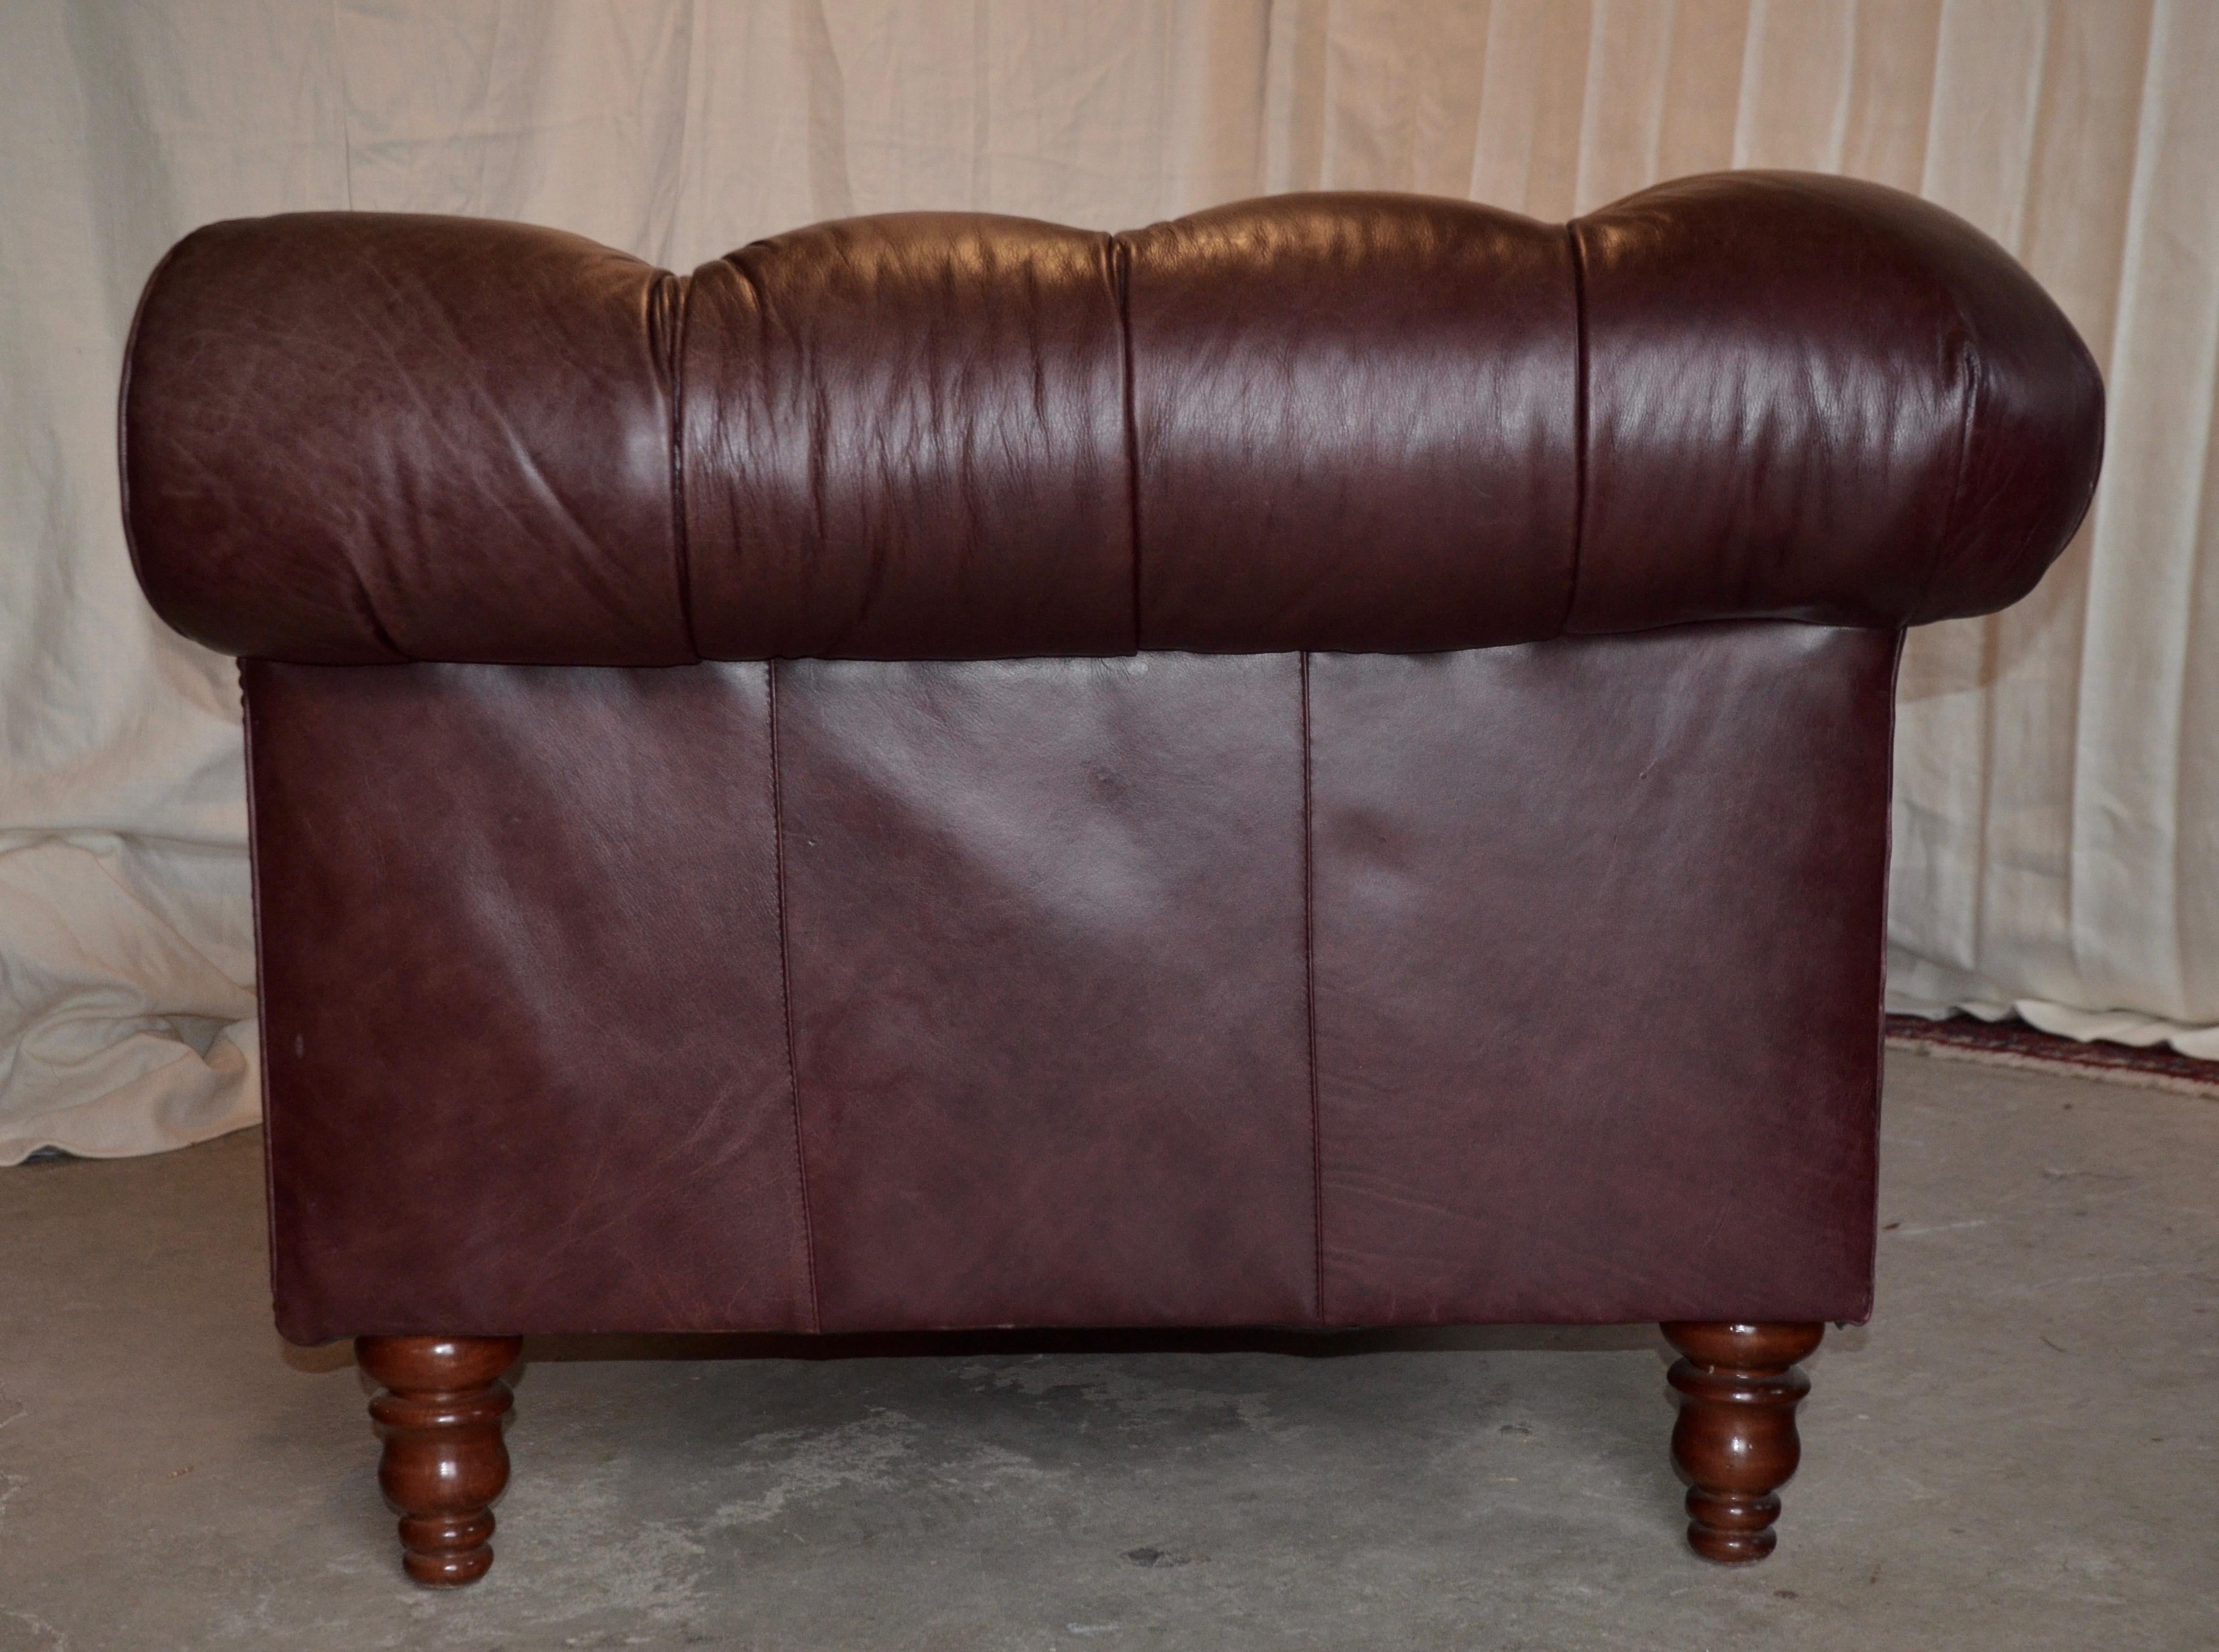 Tufted Leather Chesterfield Sofa by Century Furniture 1